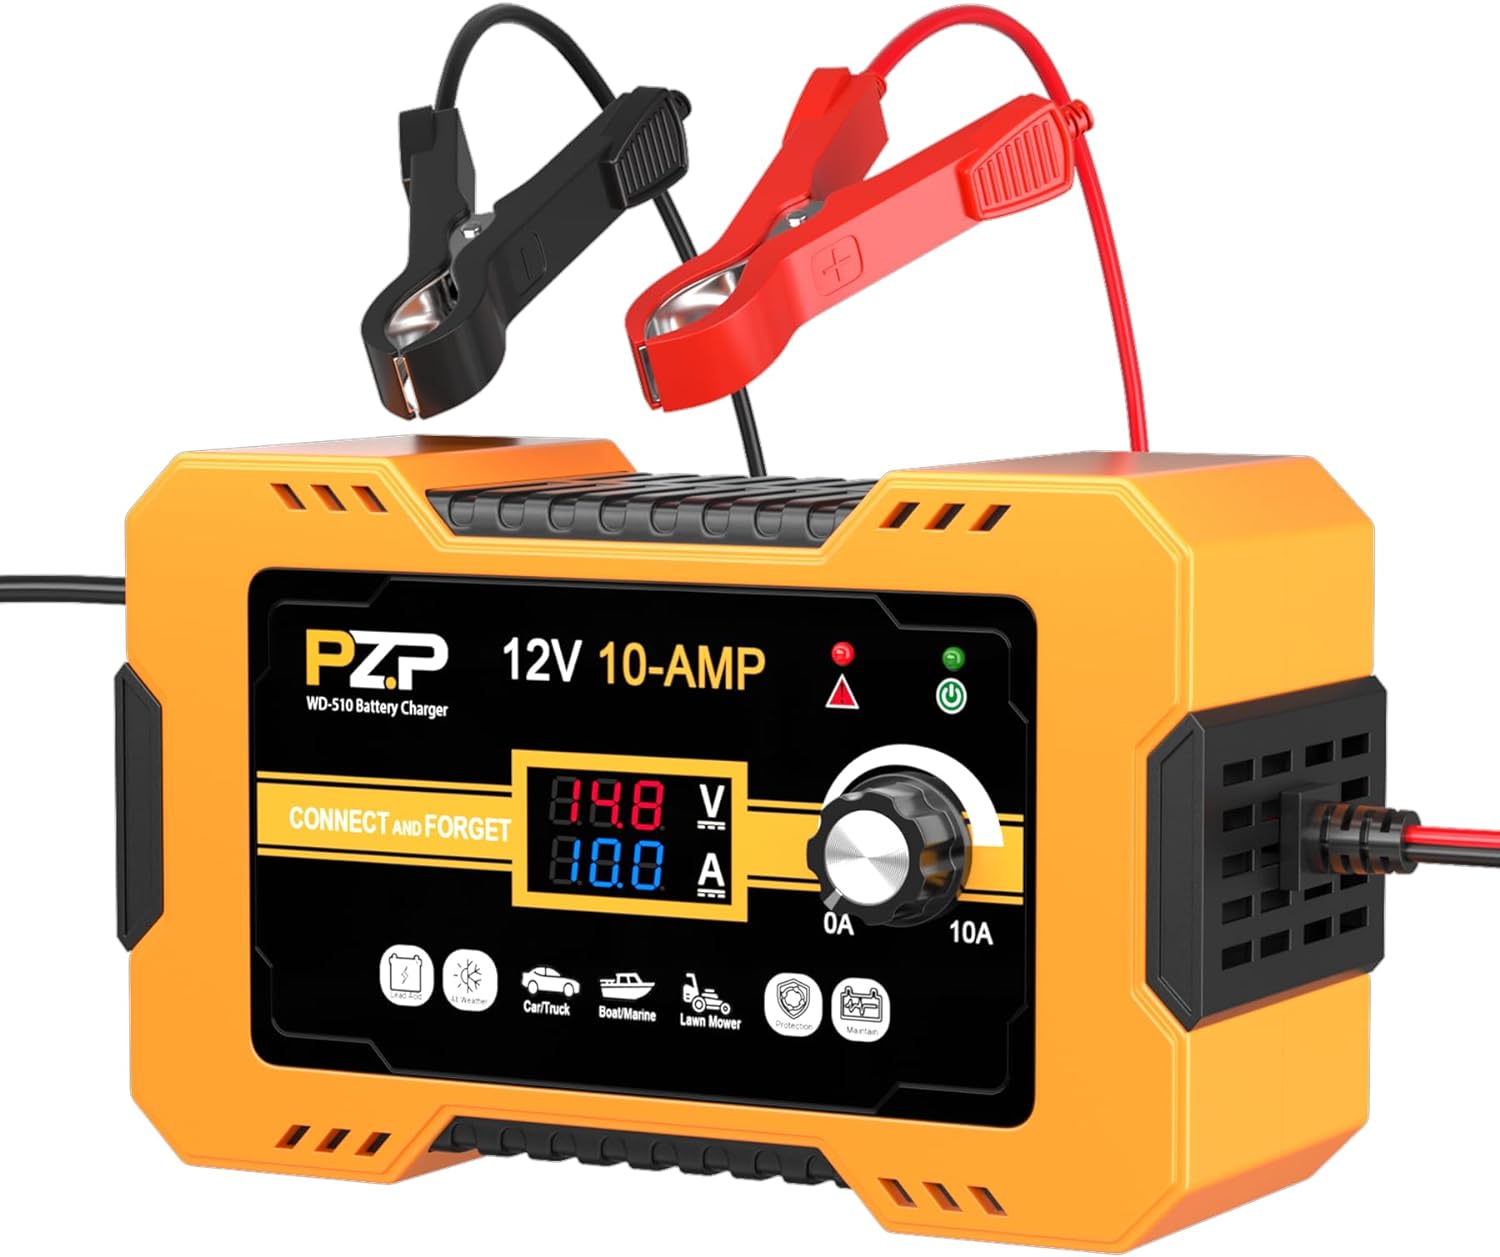 PZP 12V 10A Manual Battery Charger Review